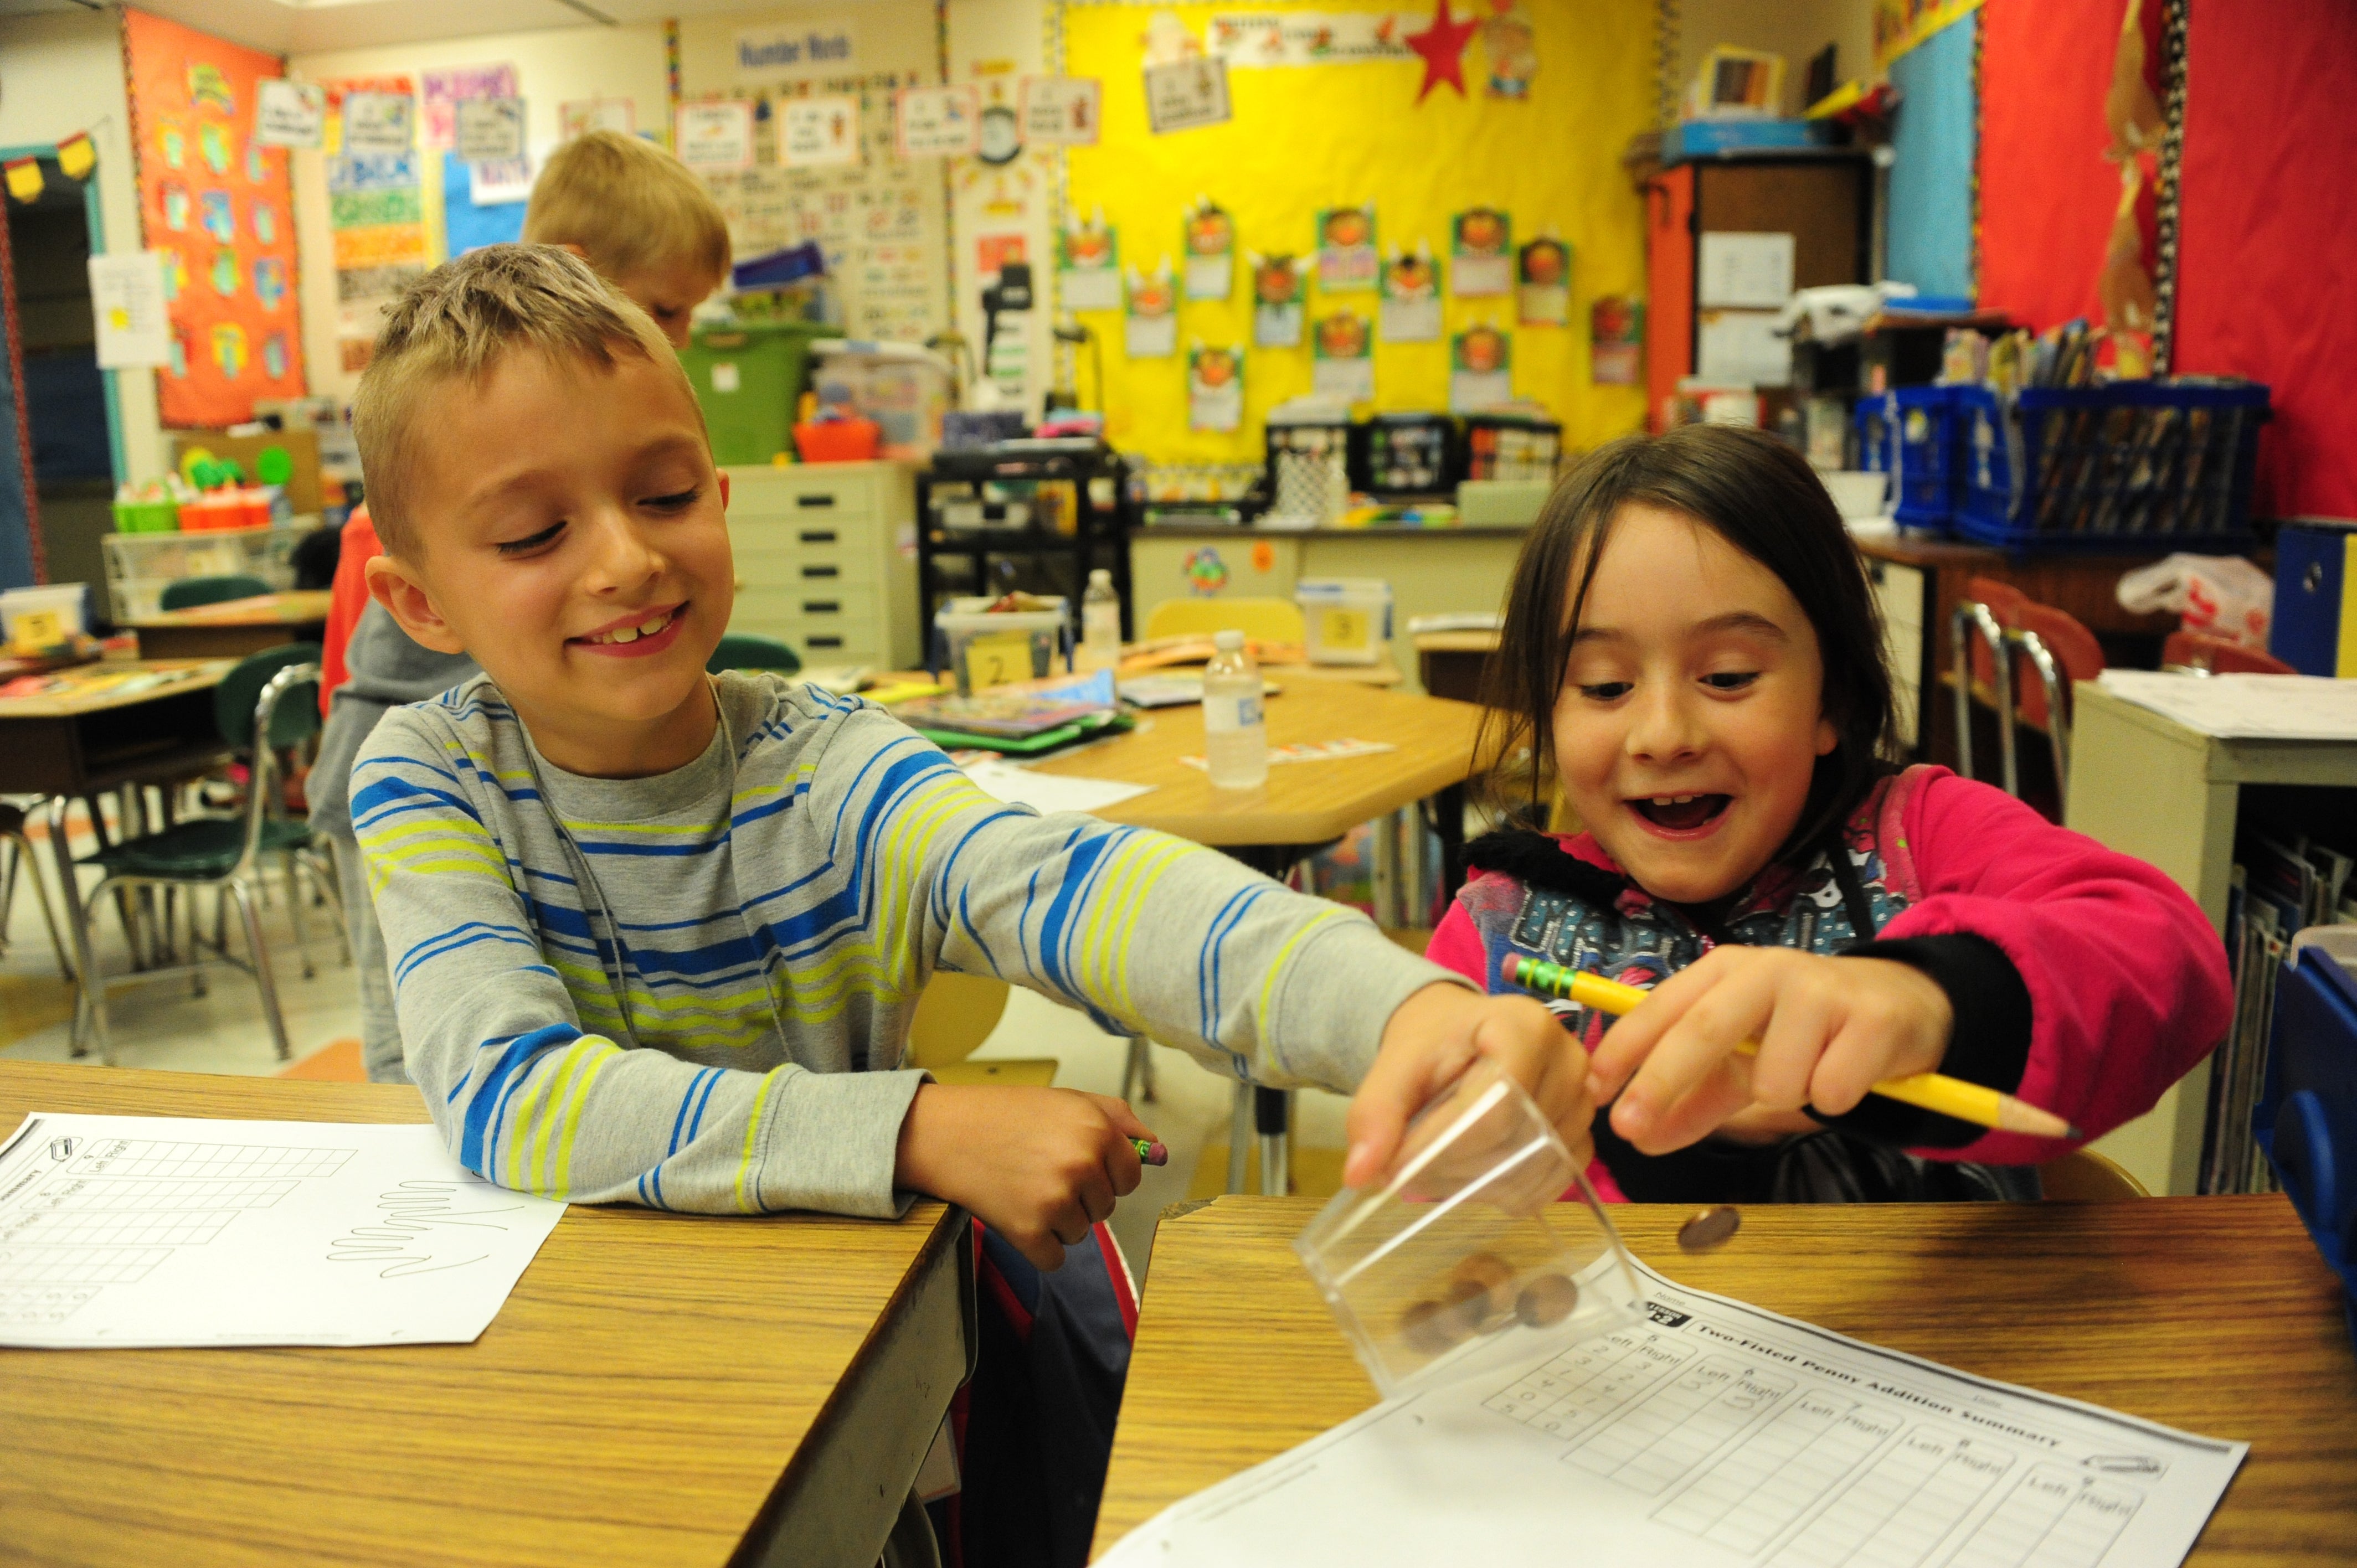 Two students sit at their desks and play with a plastic cup during their program.